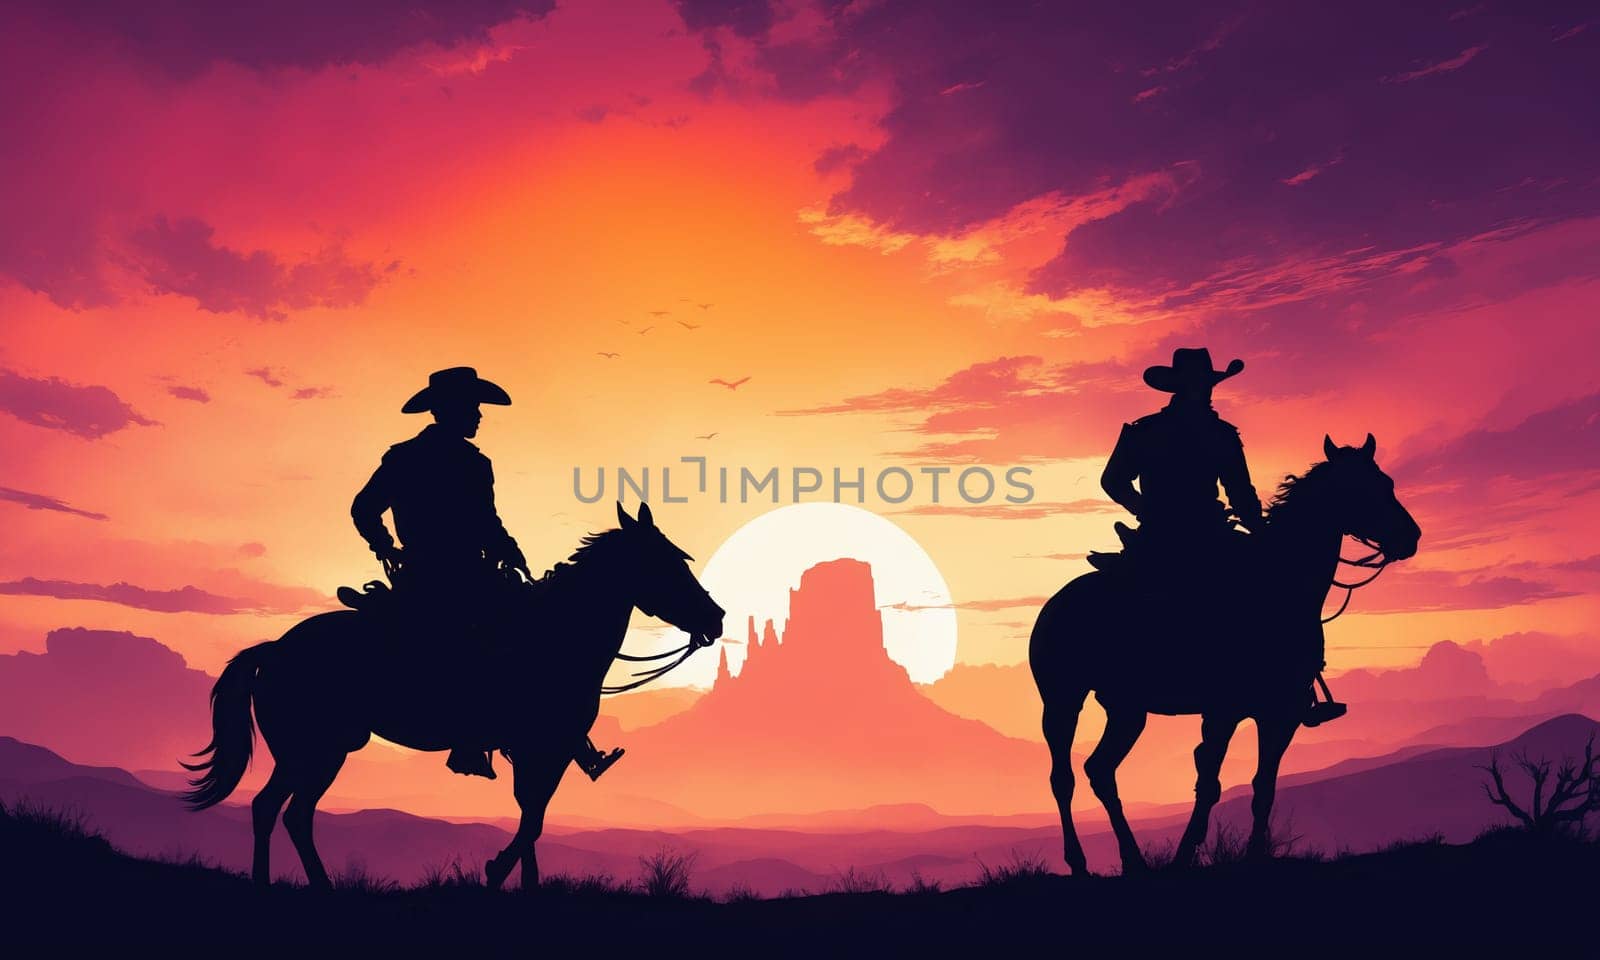 Two cowboys on horses ride in the desert at dusk, under a colorful sky by Andre1ns